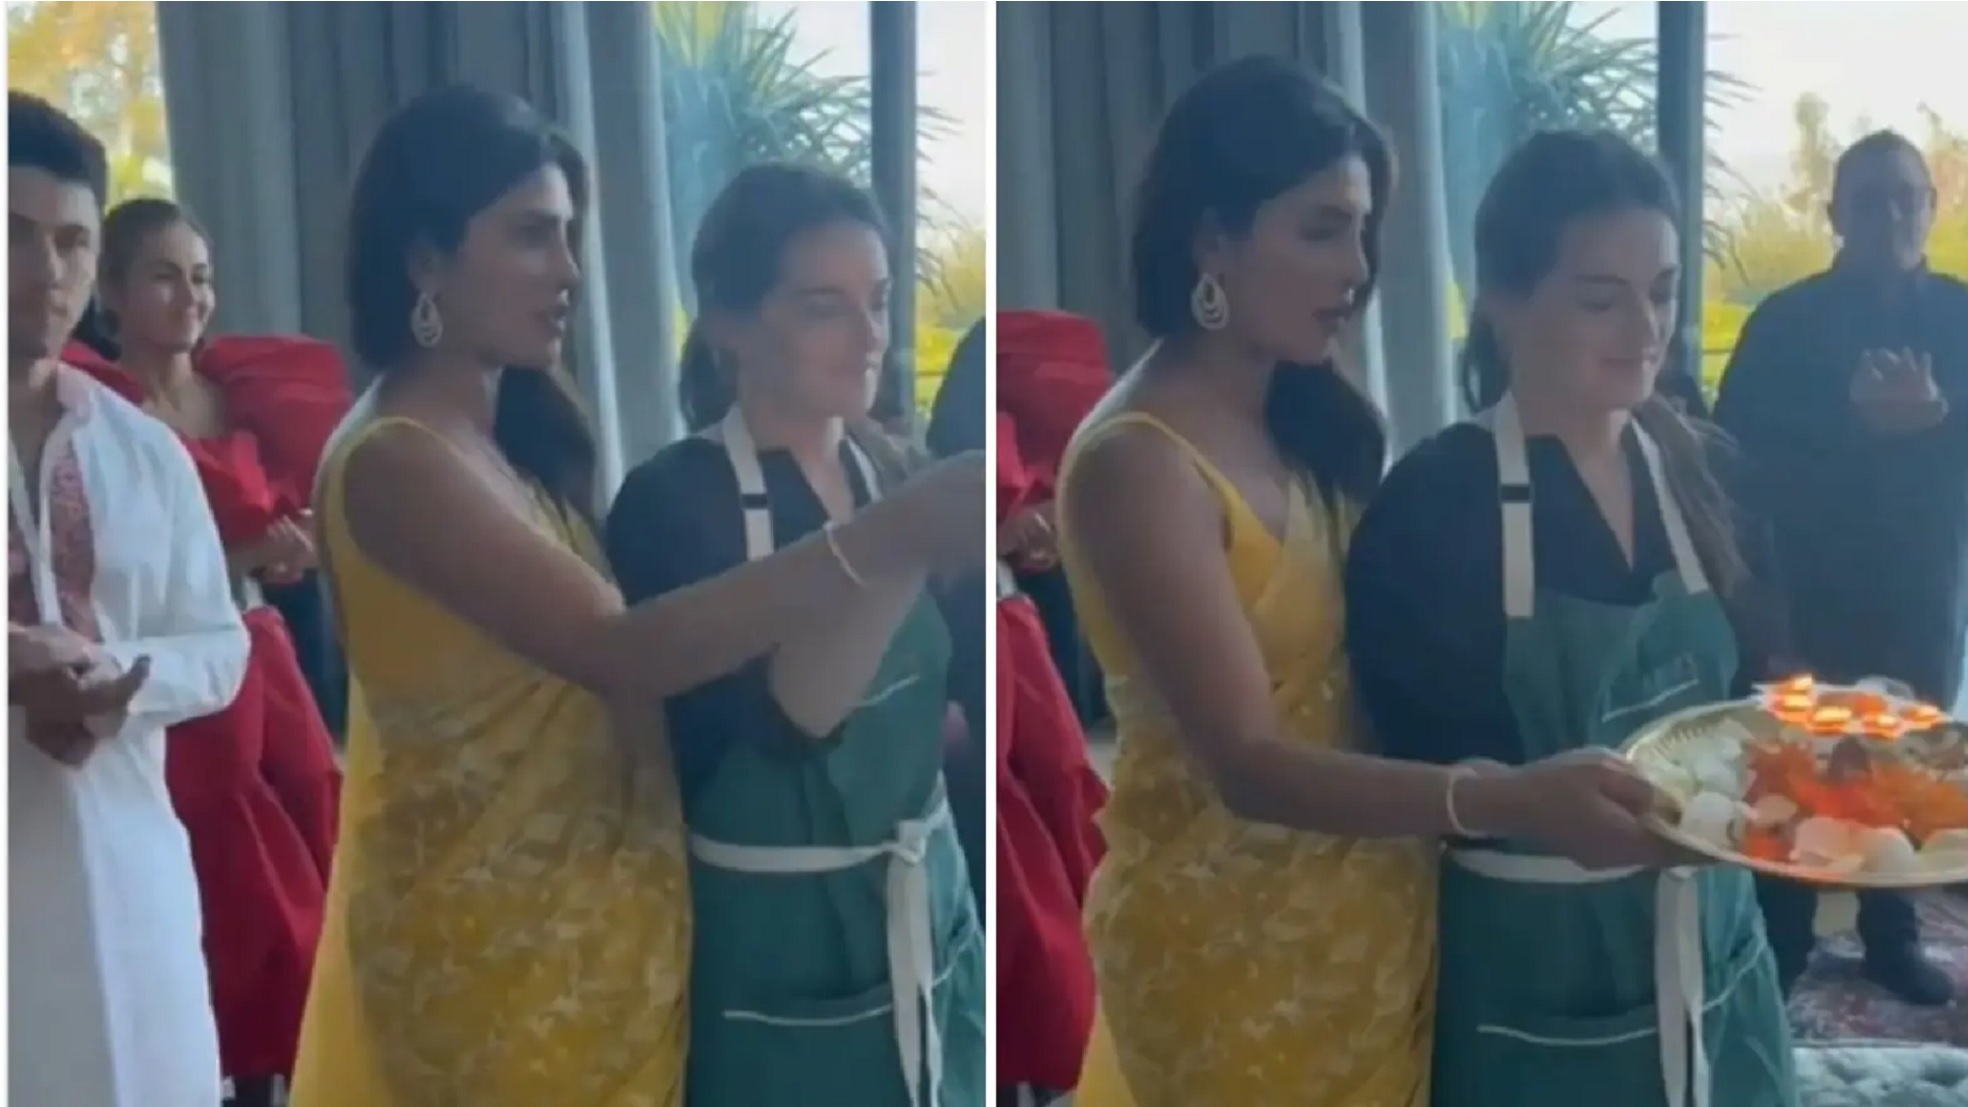 Watch: Priyanka Chopra Invites Her Chef To Perform Diwali Aarti With Her In Viral Video, Internet Lauds Her